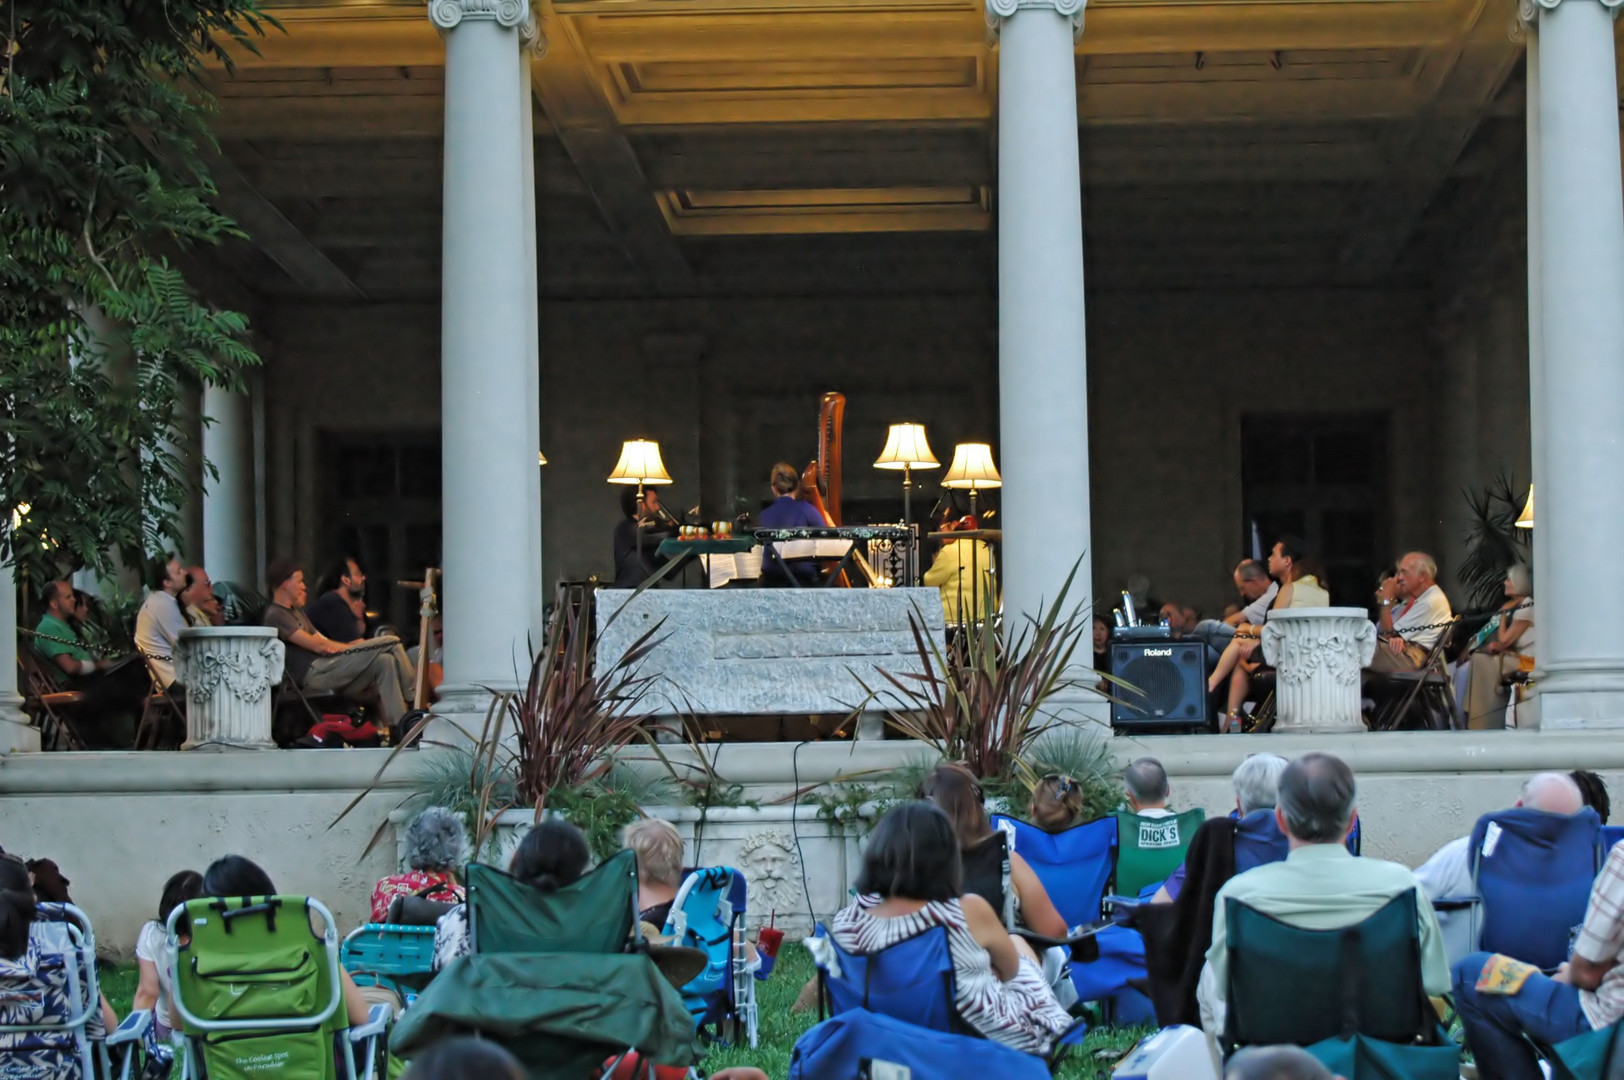 Music On The Lawn